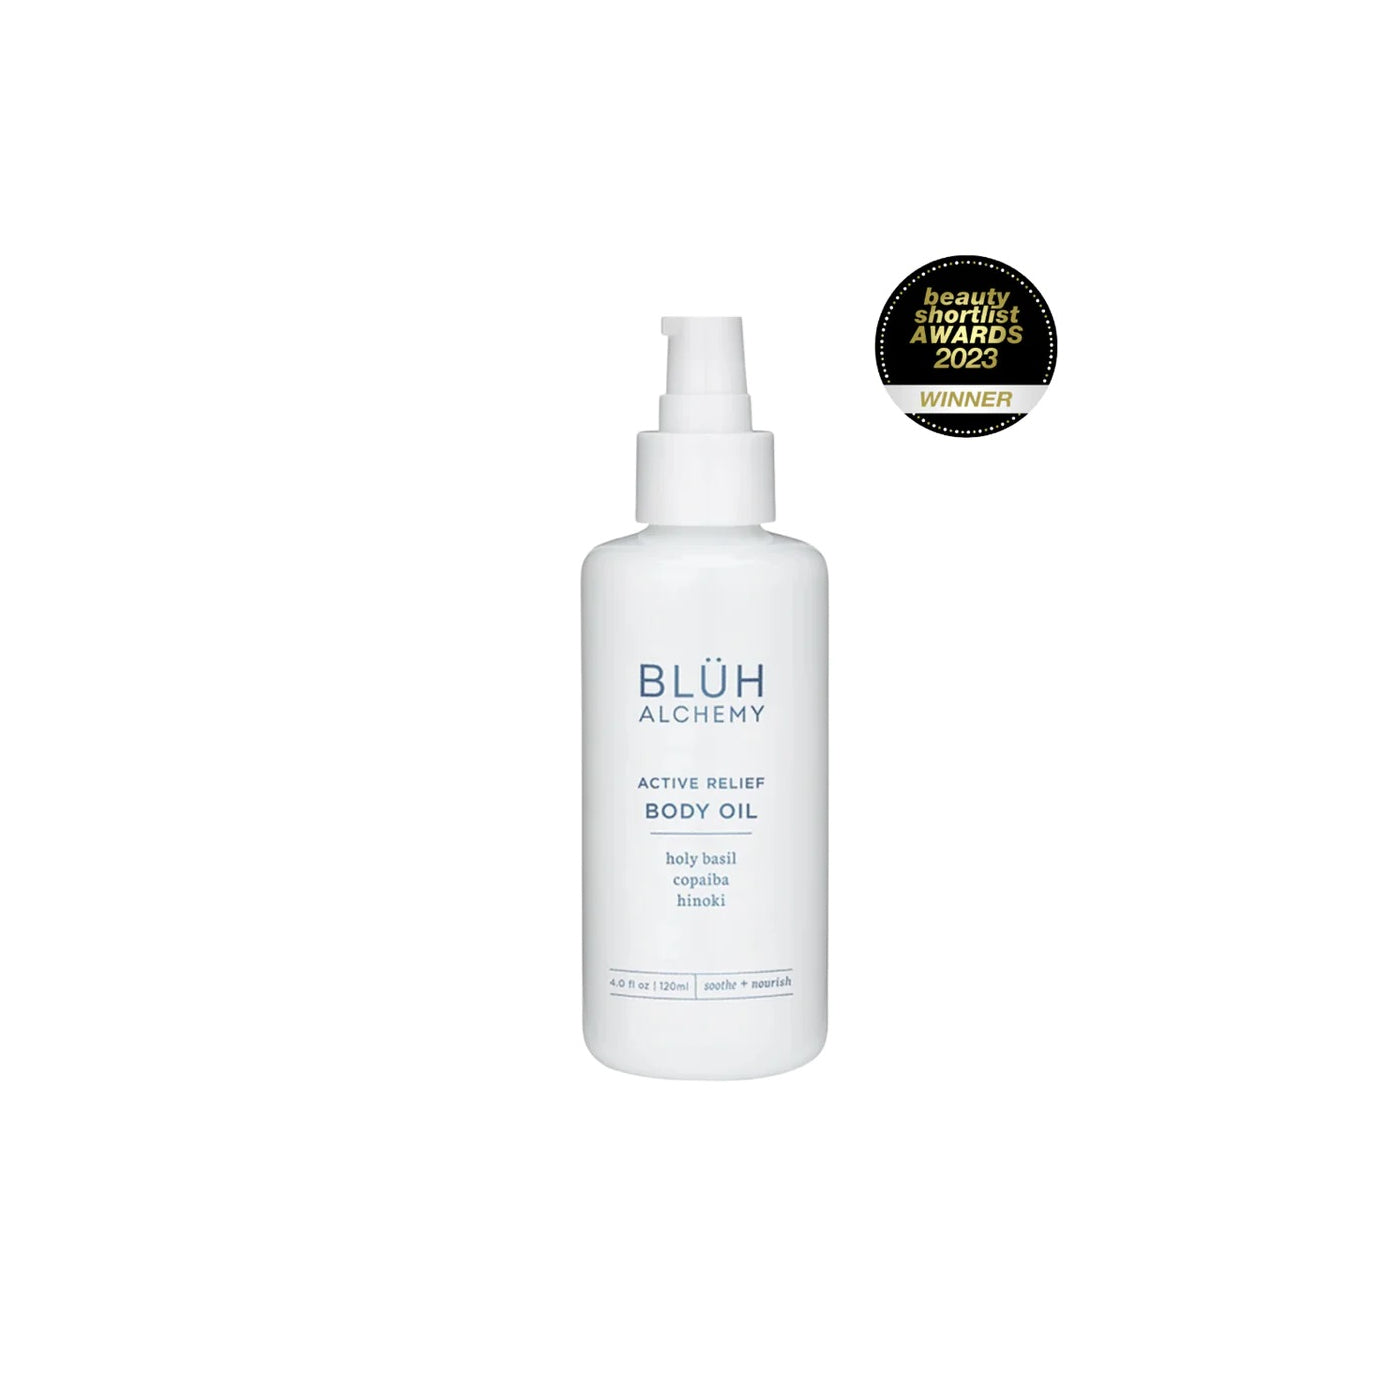 BLUH ALCHEMY Active Relief Body Oil